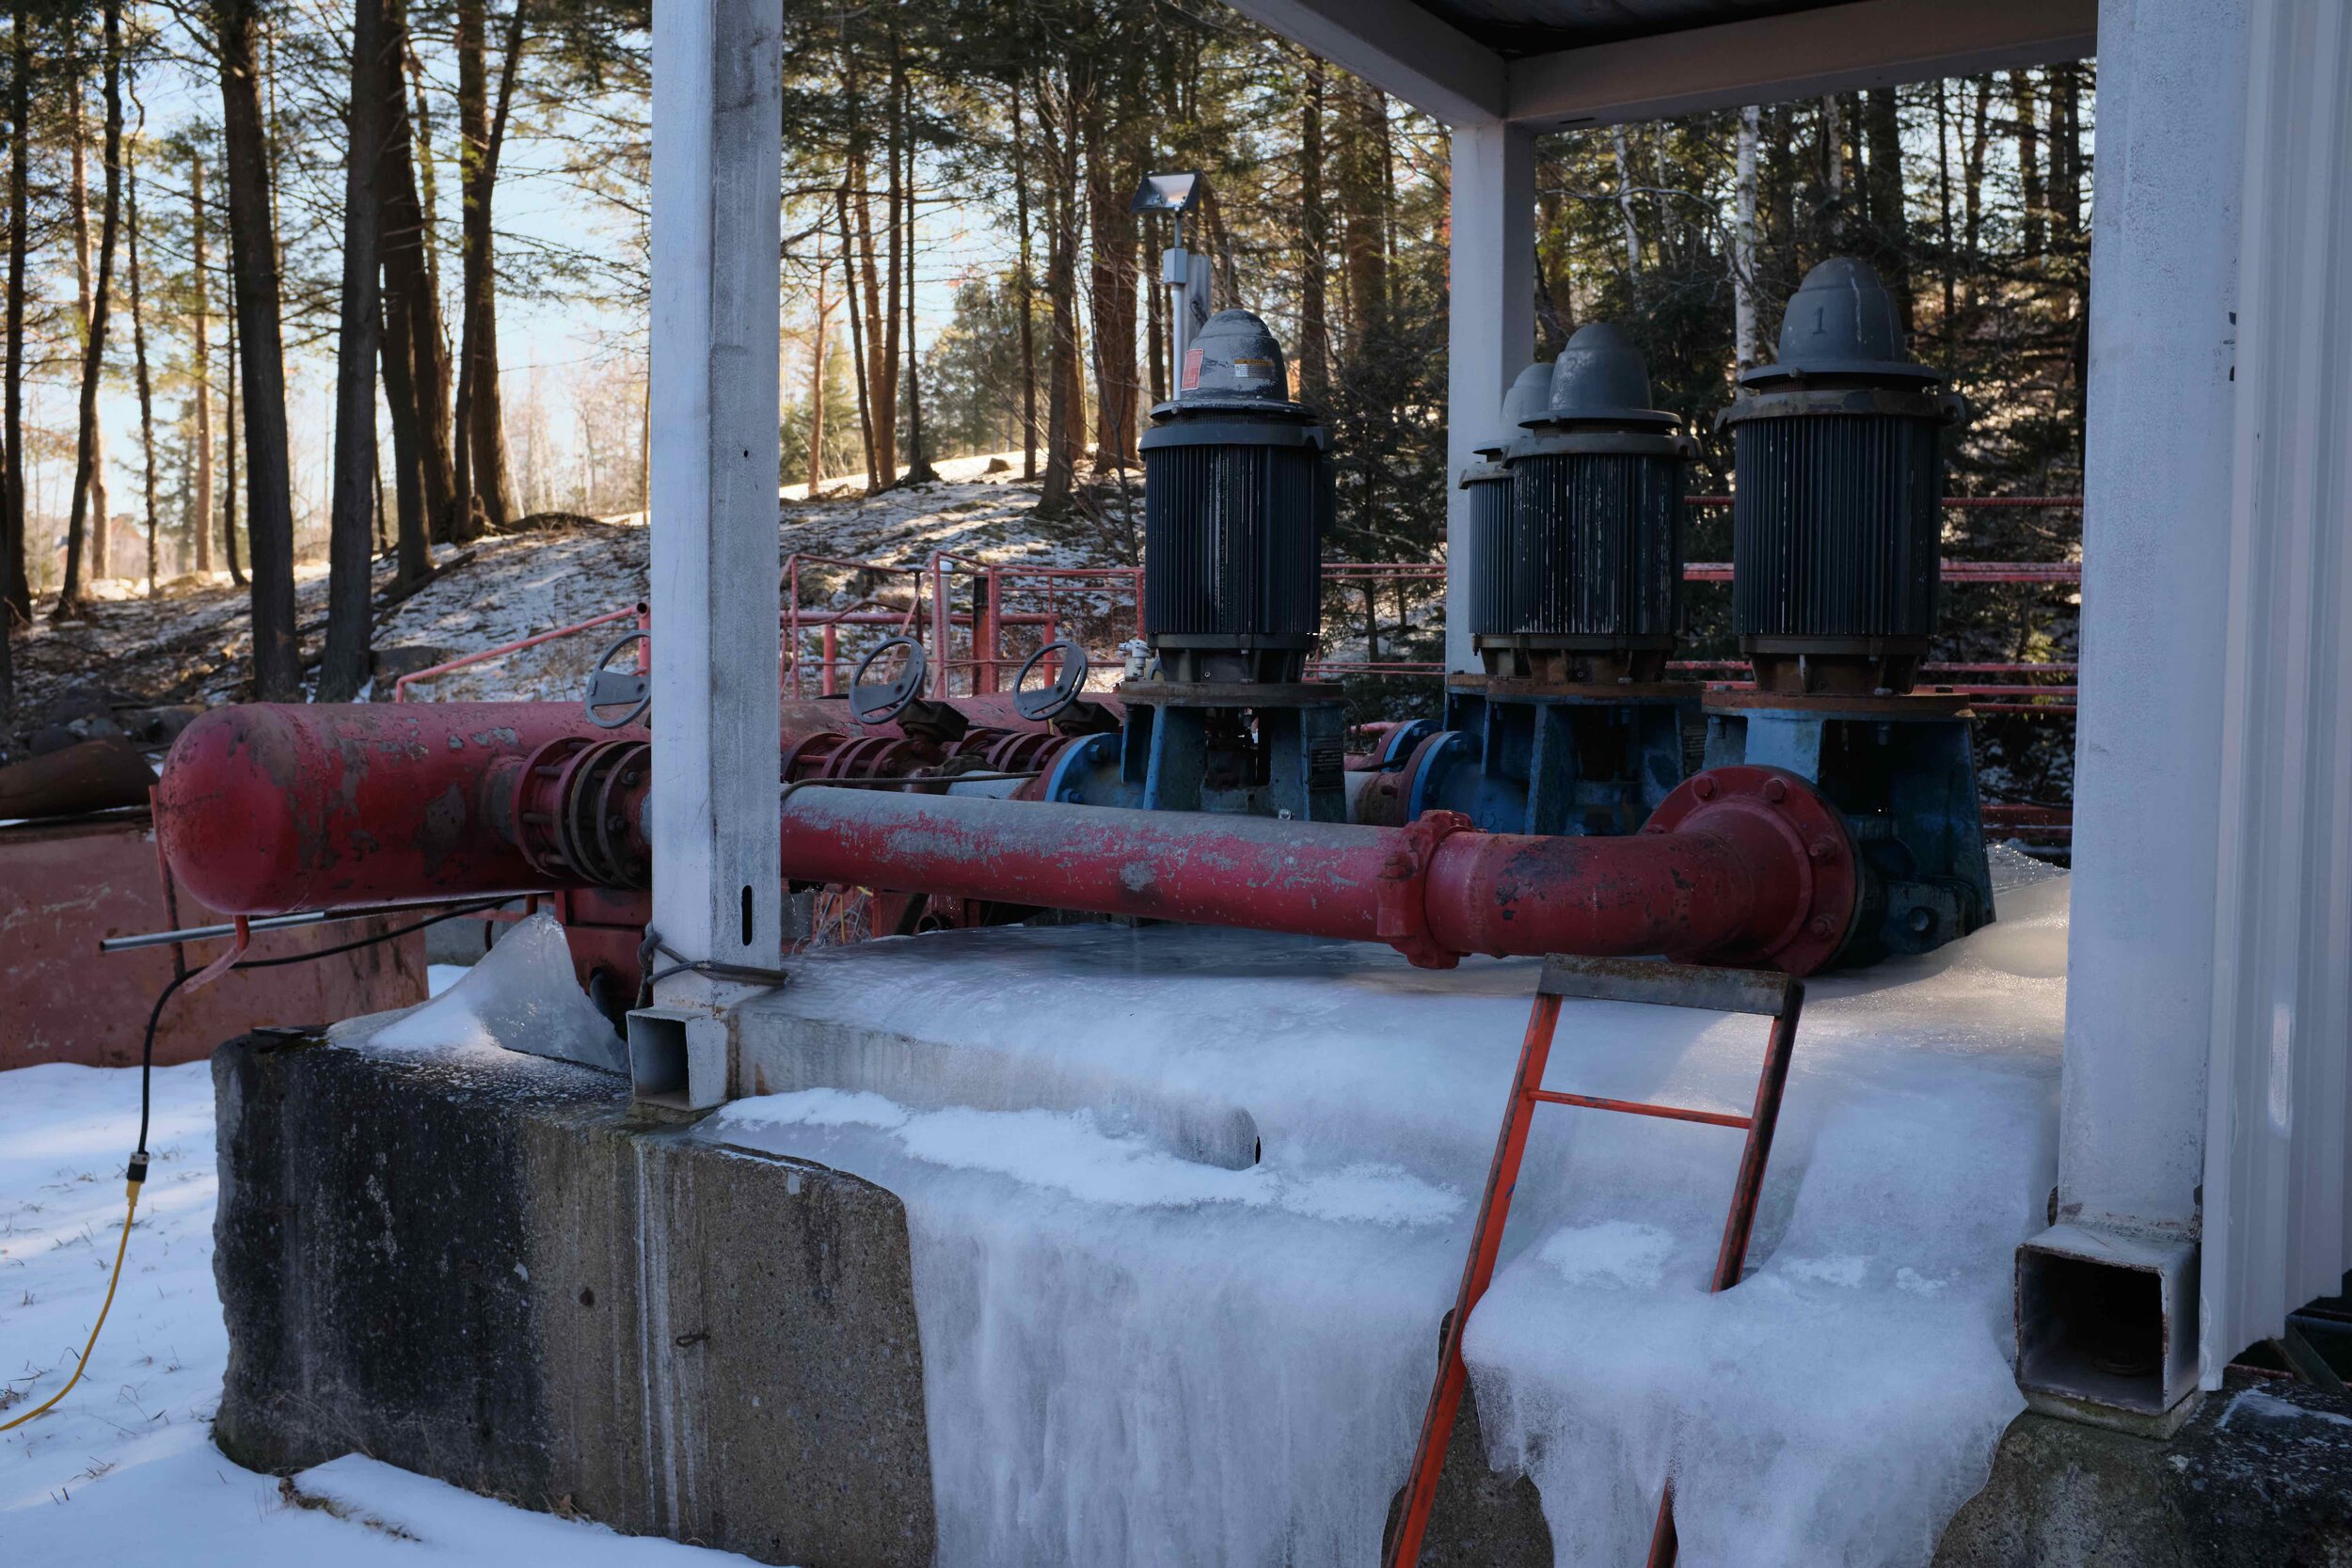  The pumps that circulate water to be chilled. If the power were to fail for more than a couple of minutes while water was in this system the entire apparatus could be destroyed in the ensuing freeze. By keeping the water in motion in a closed system